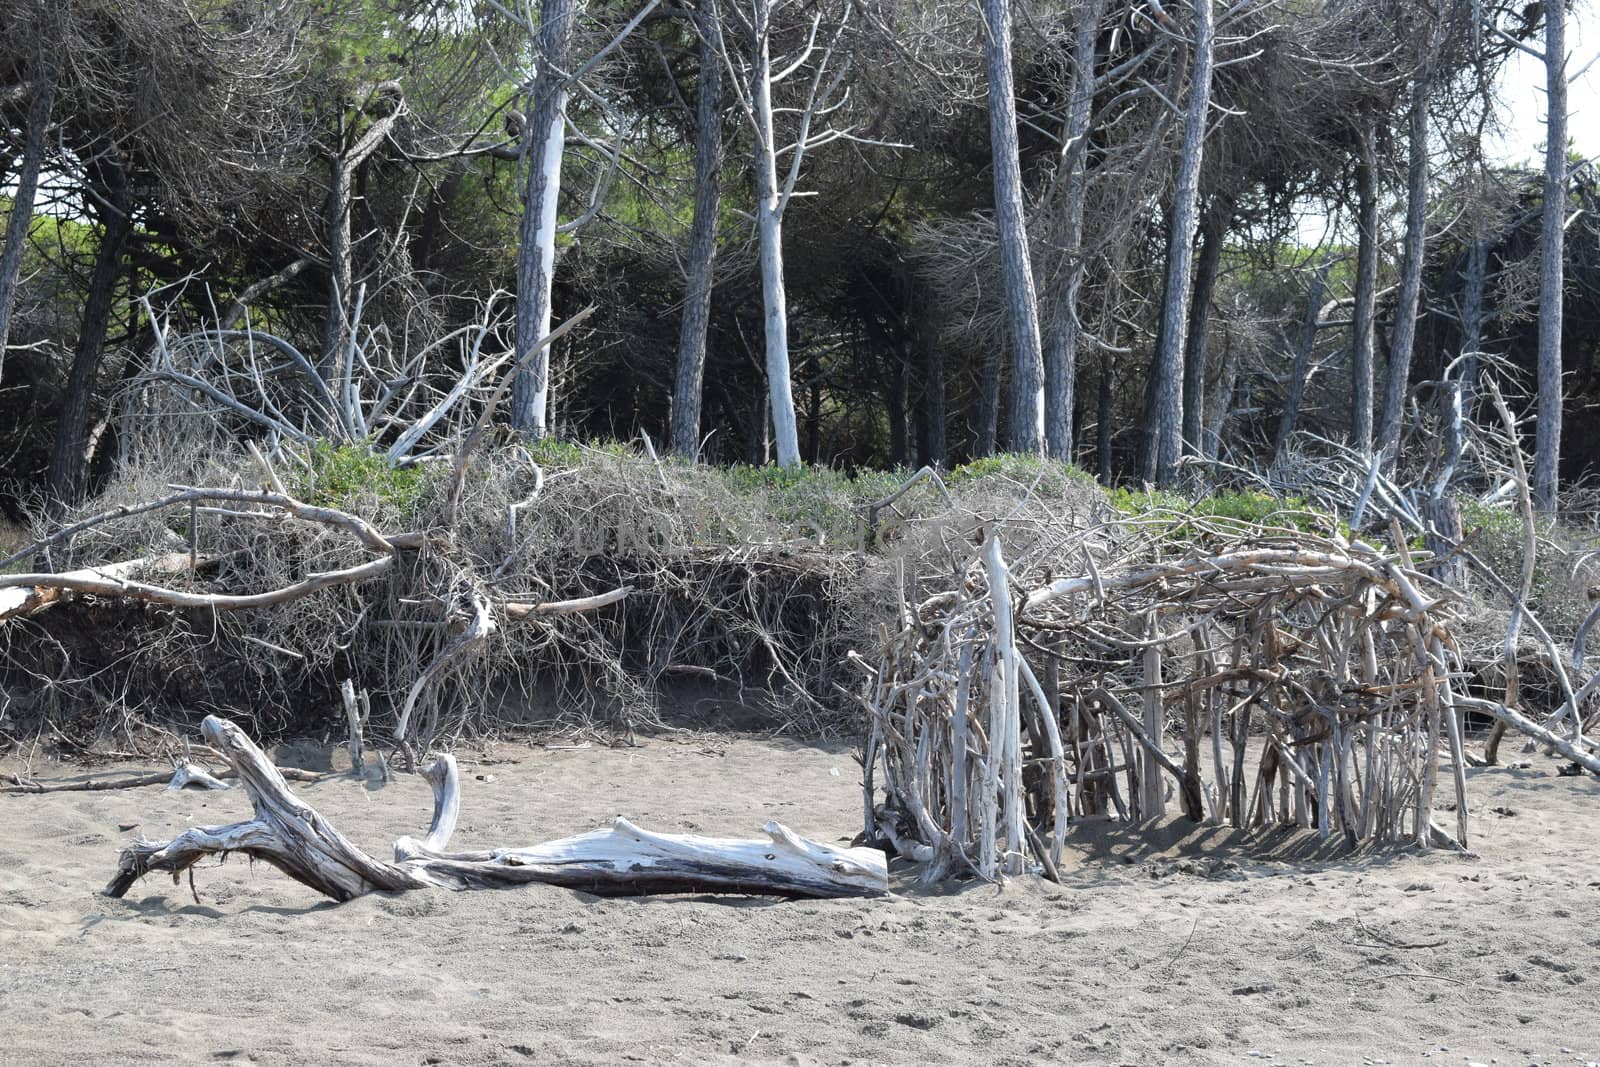 Wood construction on the beach in the pine trees and pinewood forest on the seaside, Beach and sea of Marina di Cecina, Maremma, Tuscany, Italy, Europe by matteobartolini